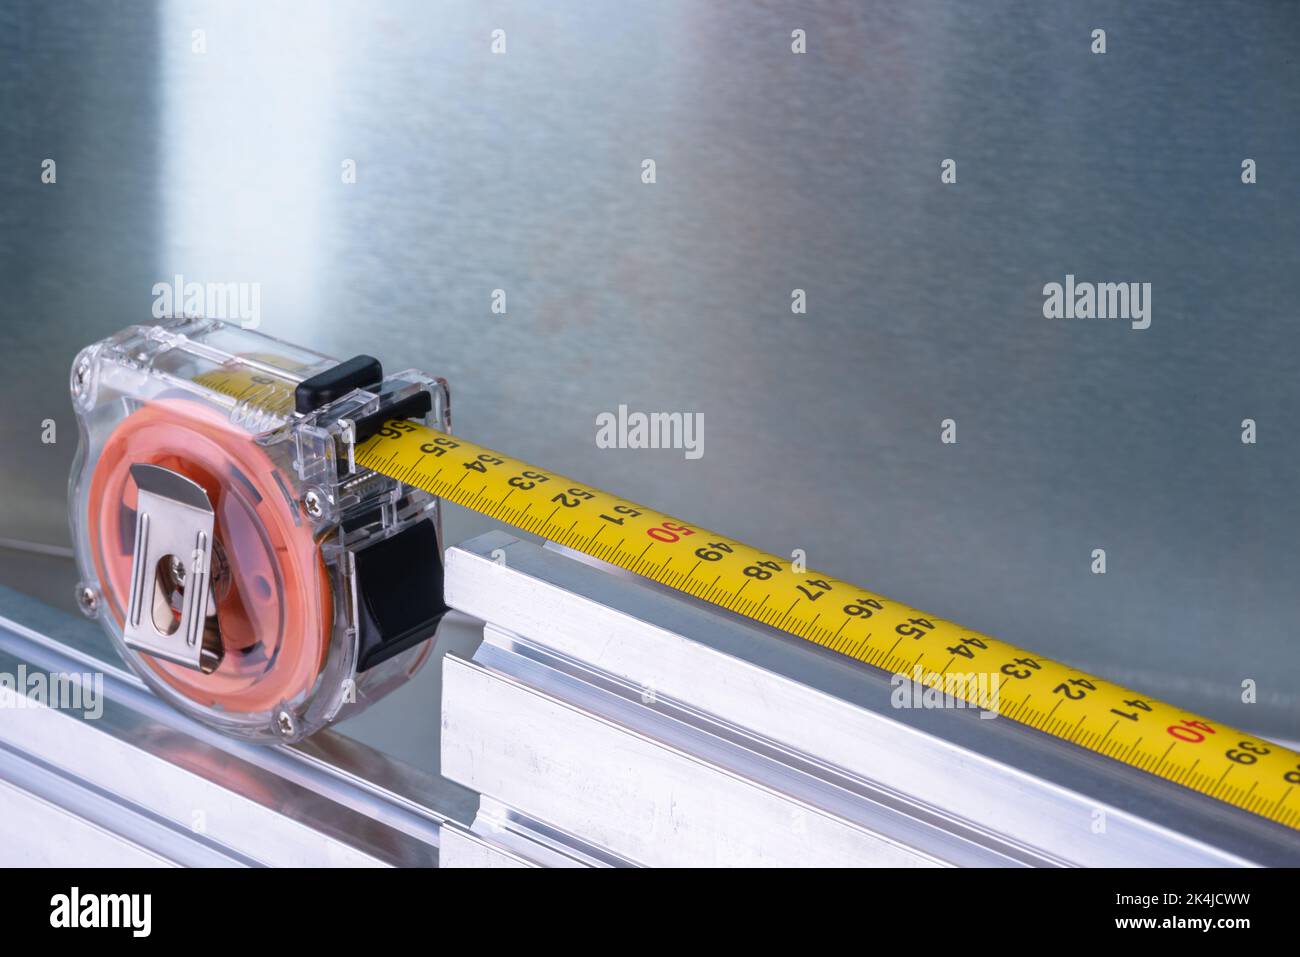 Measuring tape with metal profiles, tool and component of construction industry Stock Photo